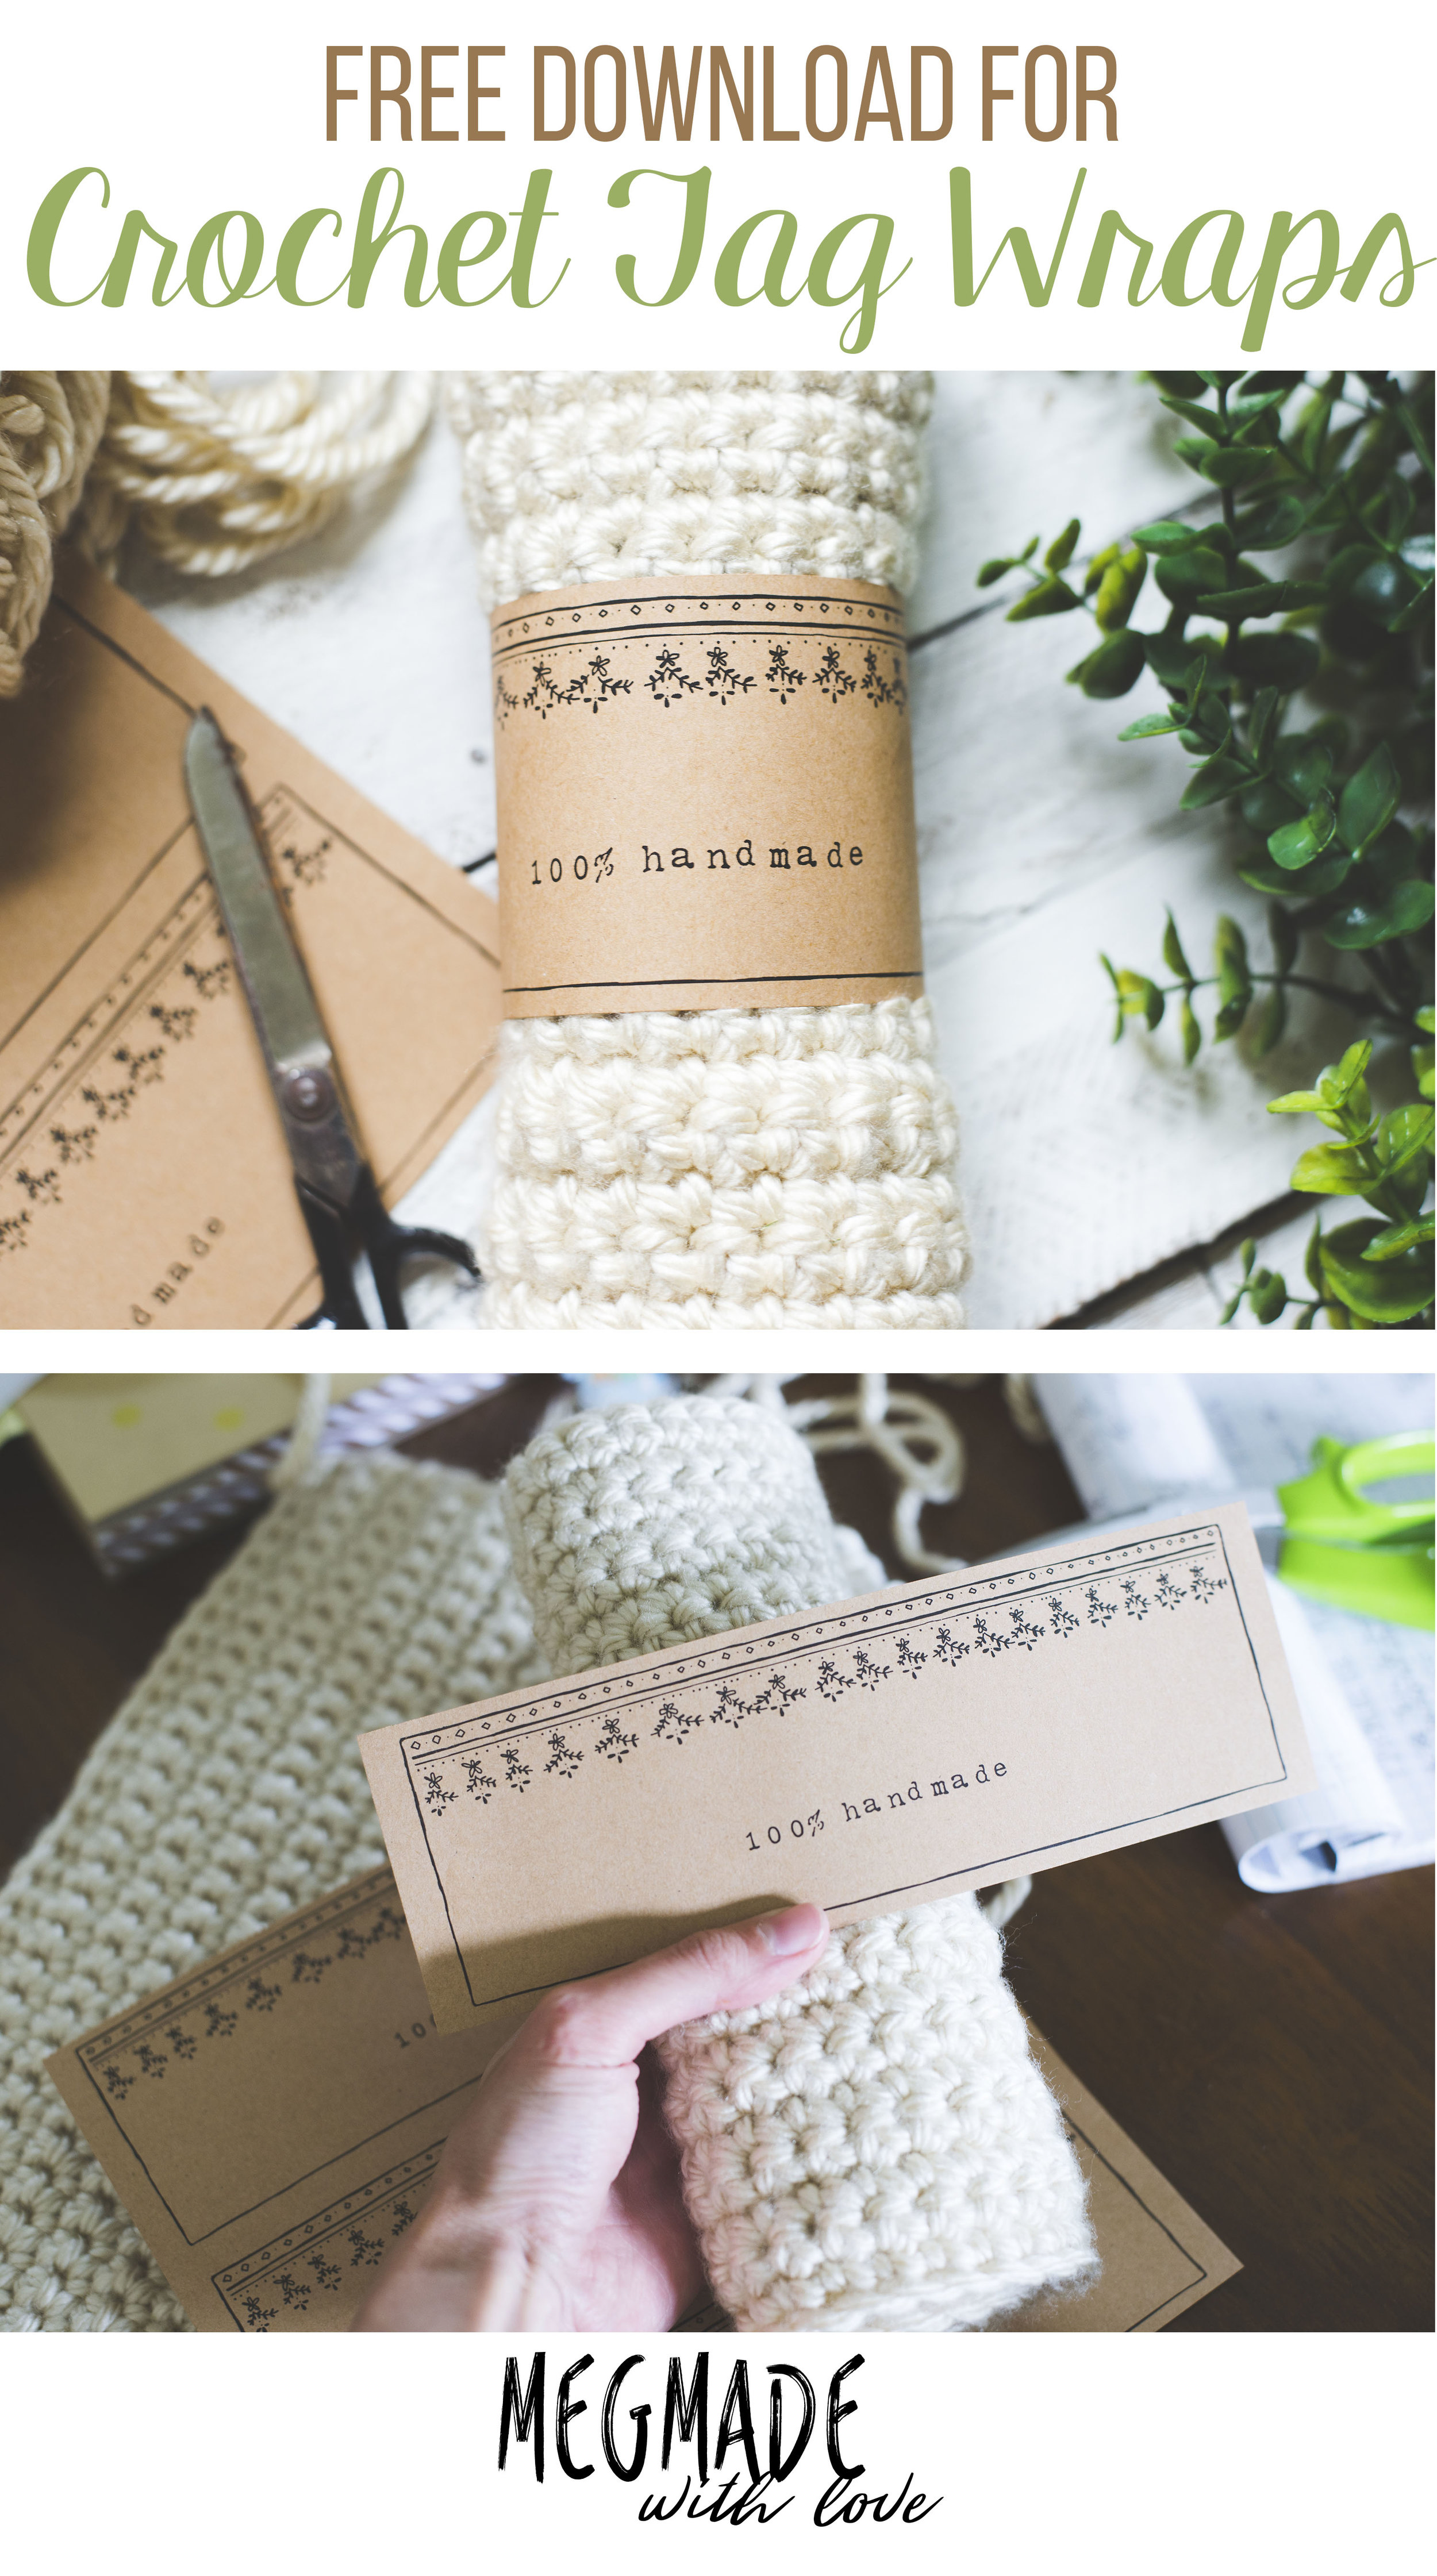 Free Printable Crochet Gift Labels - Everything.com